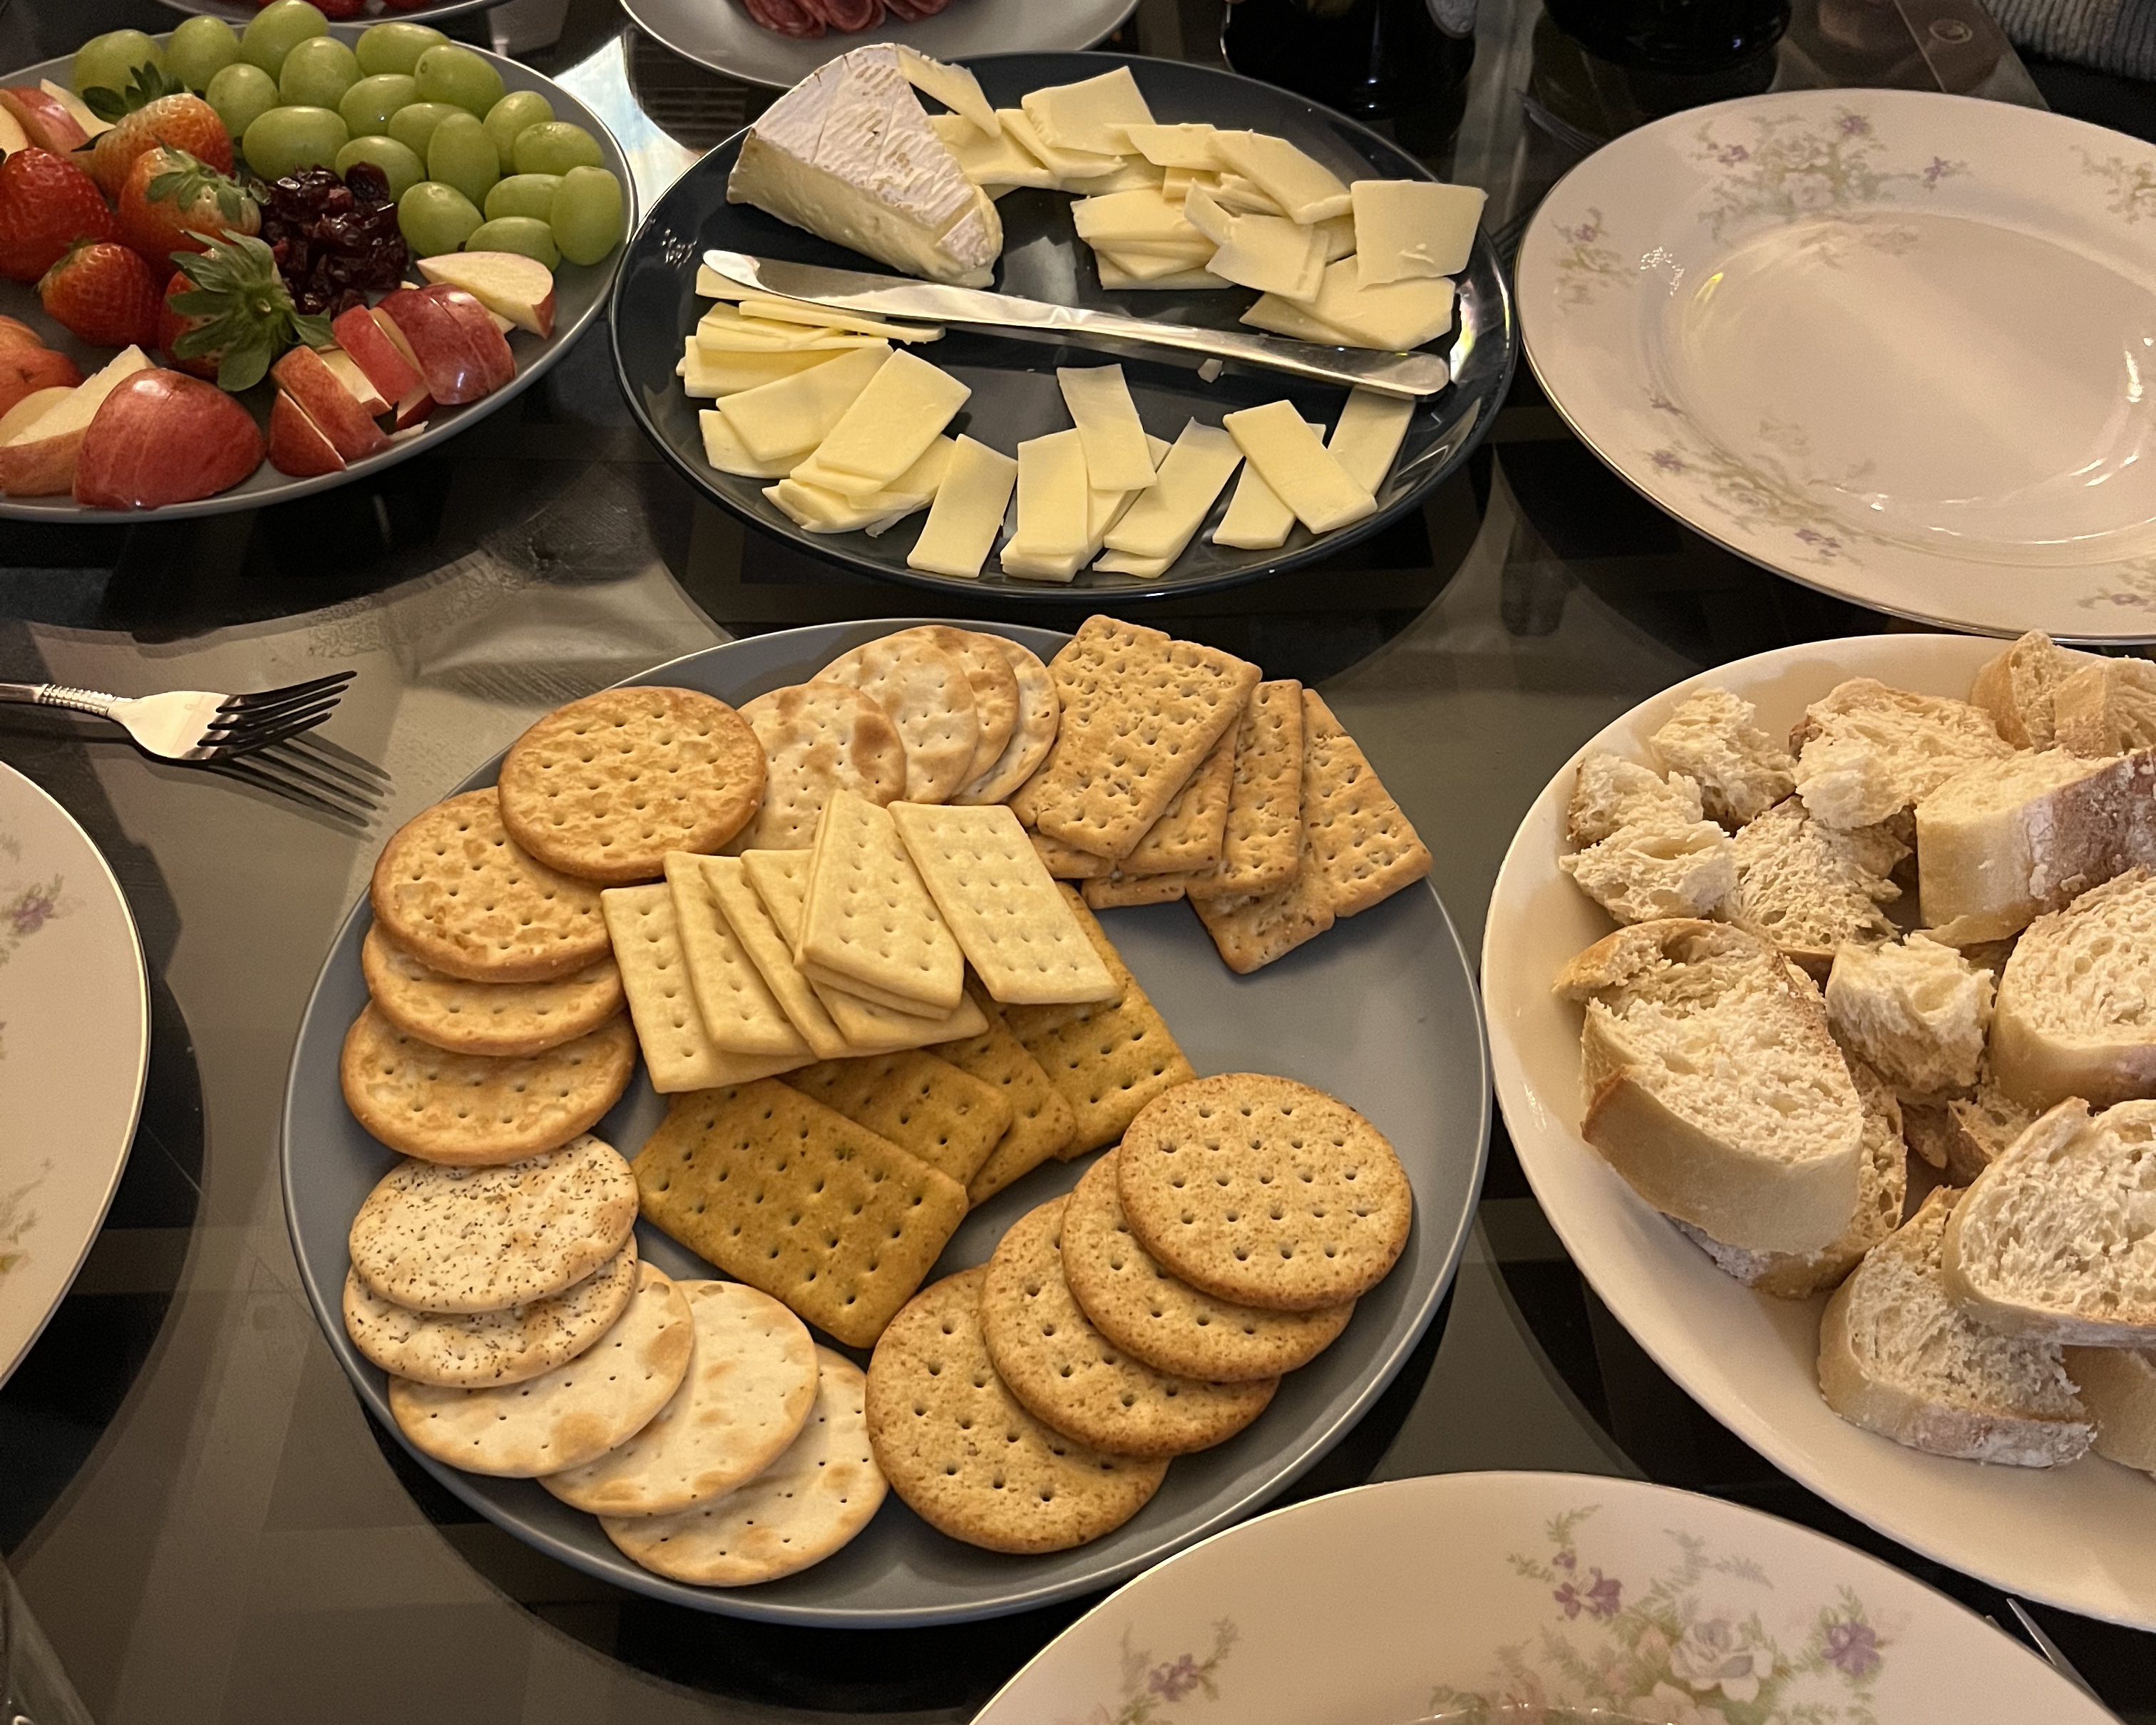 Assortment of snacks on a table.